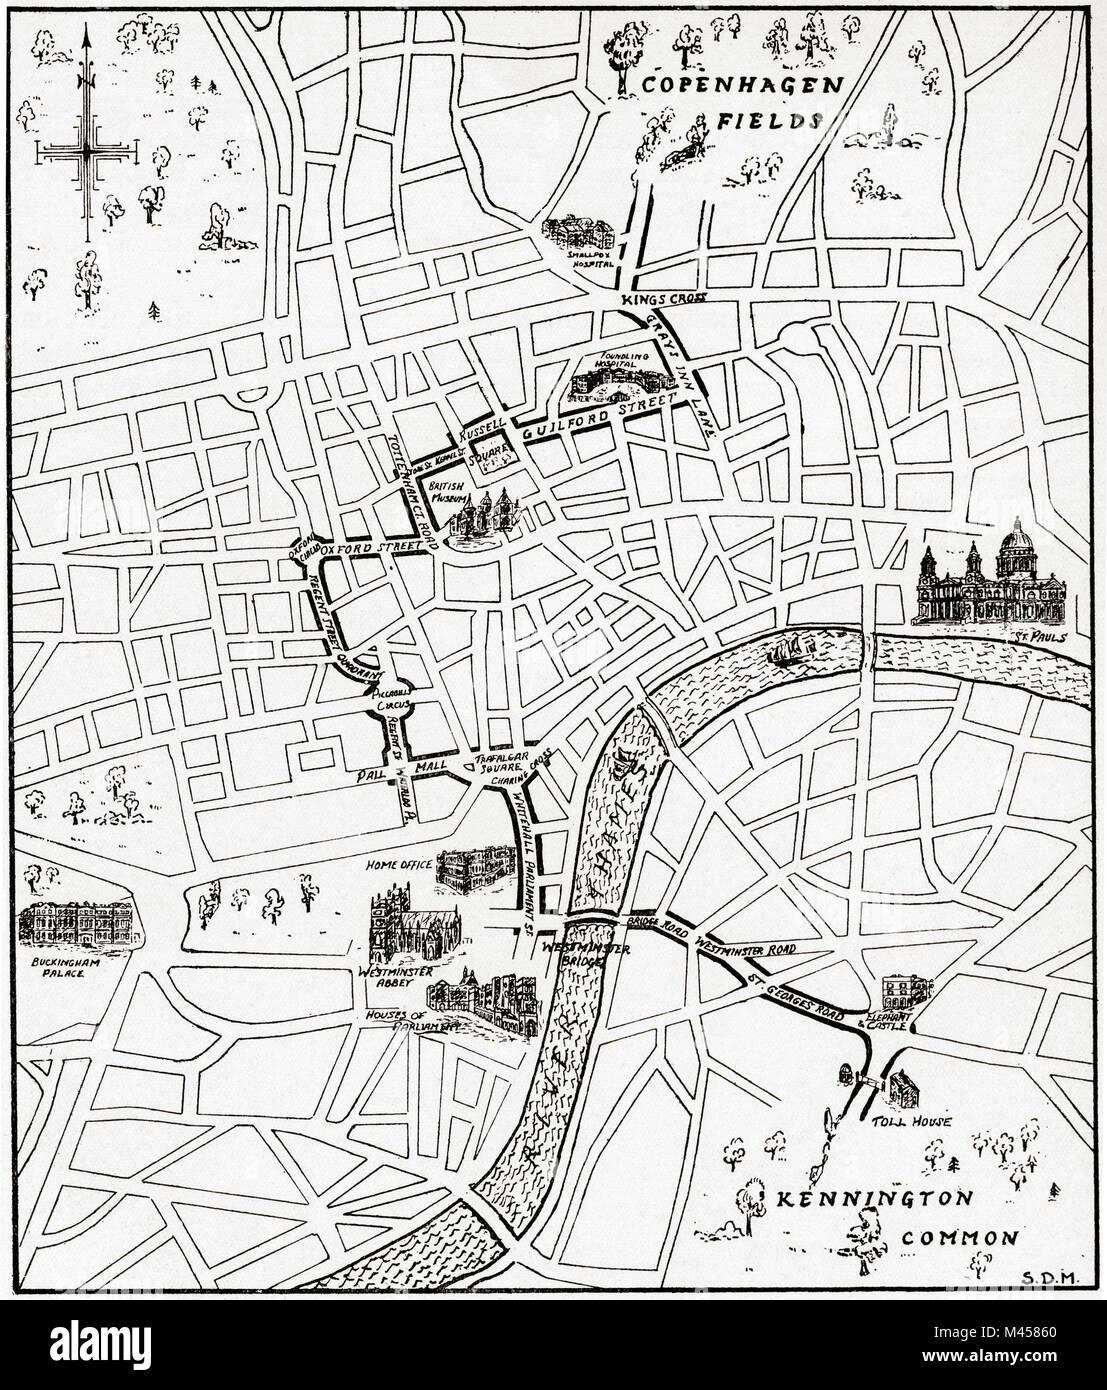 Map showing the route of the demonstration at Copenhagen Fields, London, England 21 April 1834 in protest against the deportation of the Tolpuddle Martyrs.  The Tolpuddle Martyrs, a group of 19th-century Dorset agricultural labourers who were arrested for and convicted of swearing a secret oath as members of the Friendly Society of Agricultural Labourers, they were sentenced to penal transportation to Australia and Tasmania.  From The Martyrs of Tolpuddle, published 1934. From The Martyrs of Tolpuddle, published 1934. Stock Photo